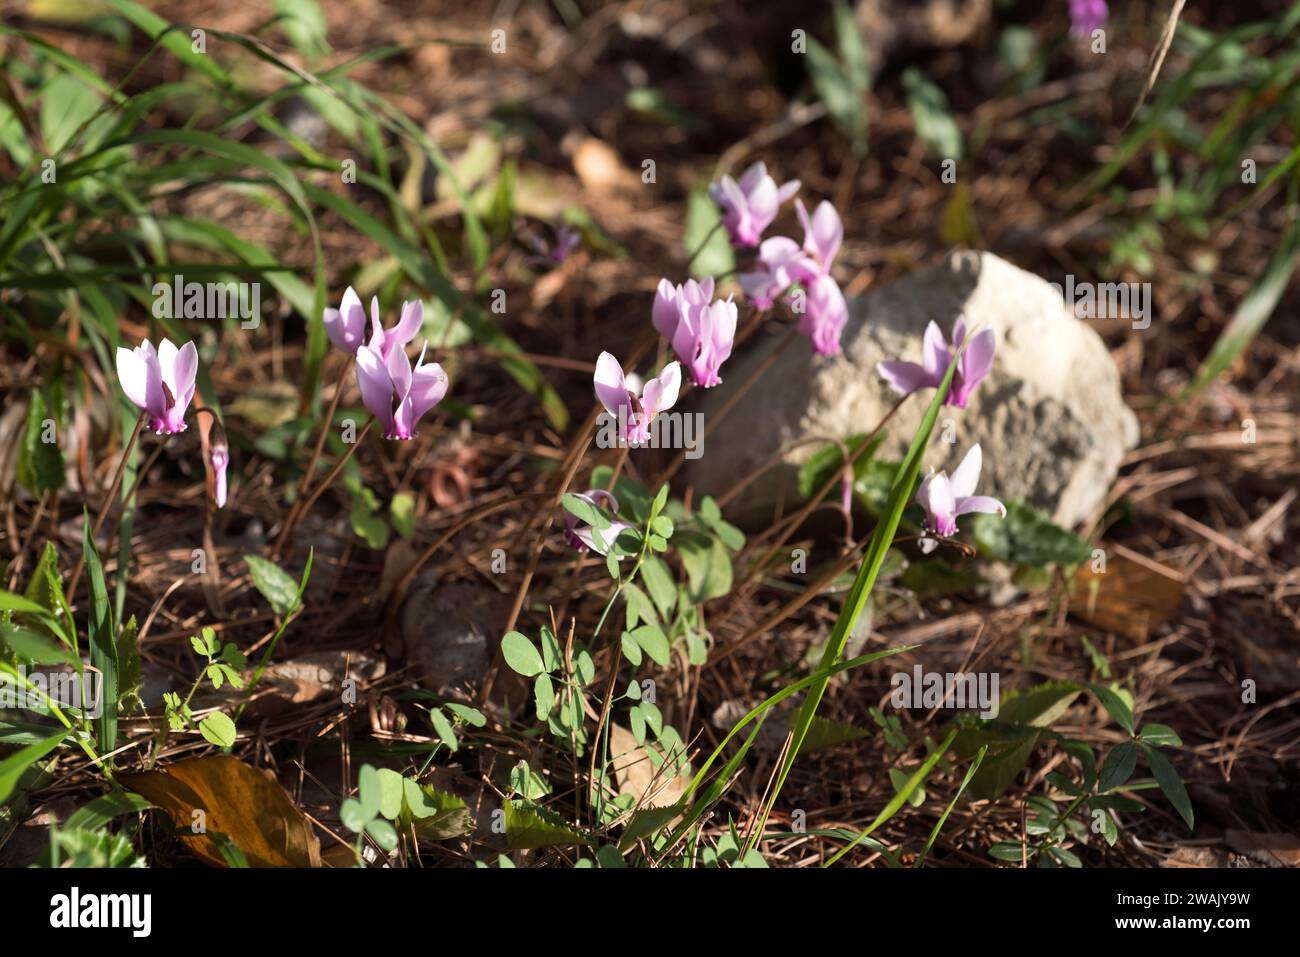 Purple cyclamen (Cyclamen purpurascens) is a perennial herb native to deciduous forests of Europe, from France to Russia. This photo was taken in Krka Stock Photo